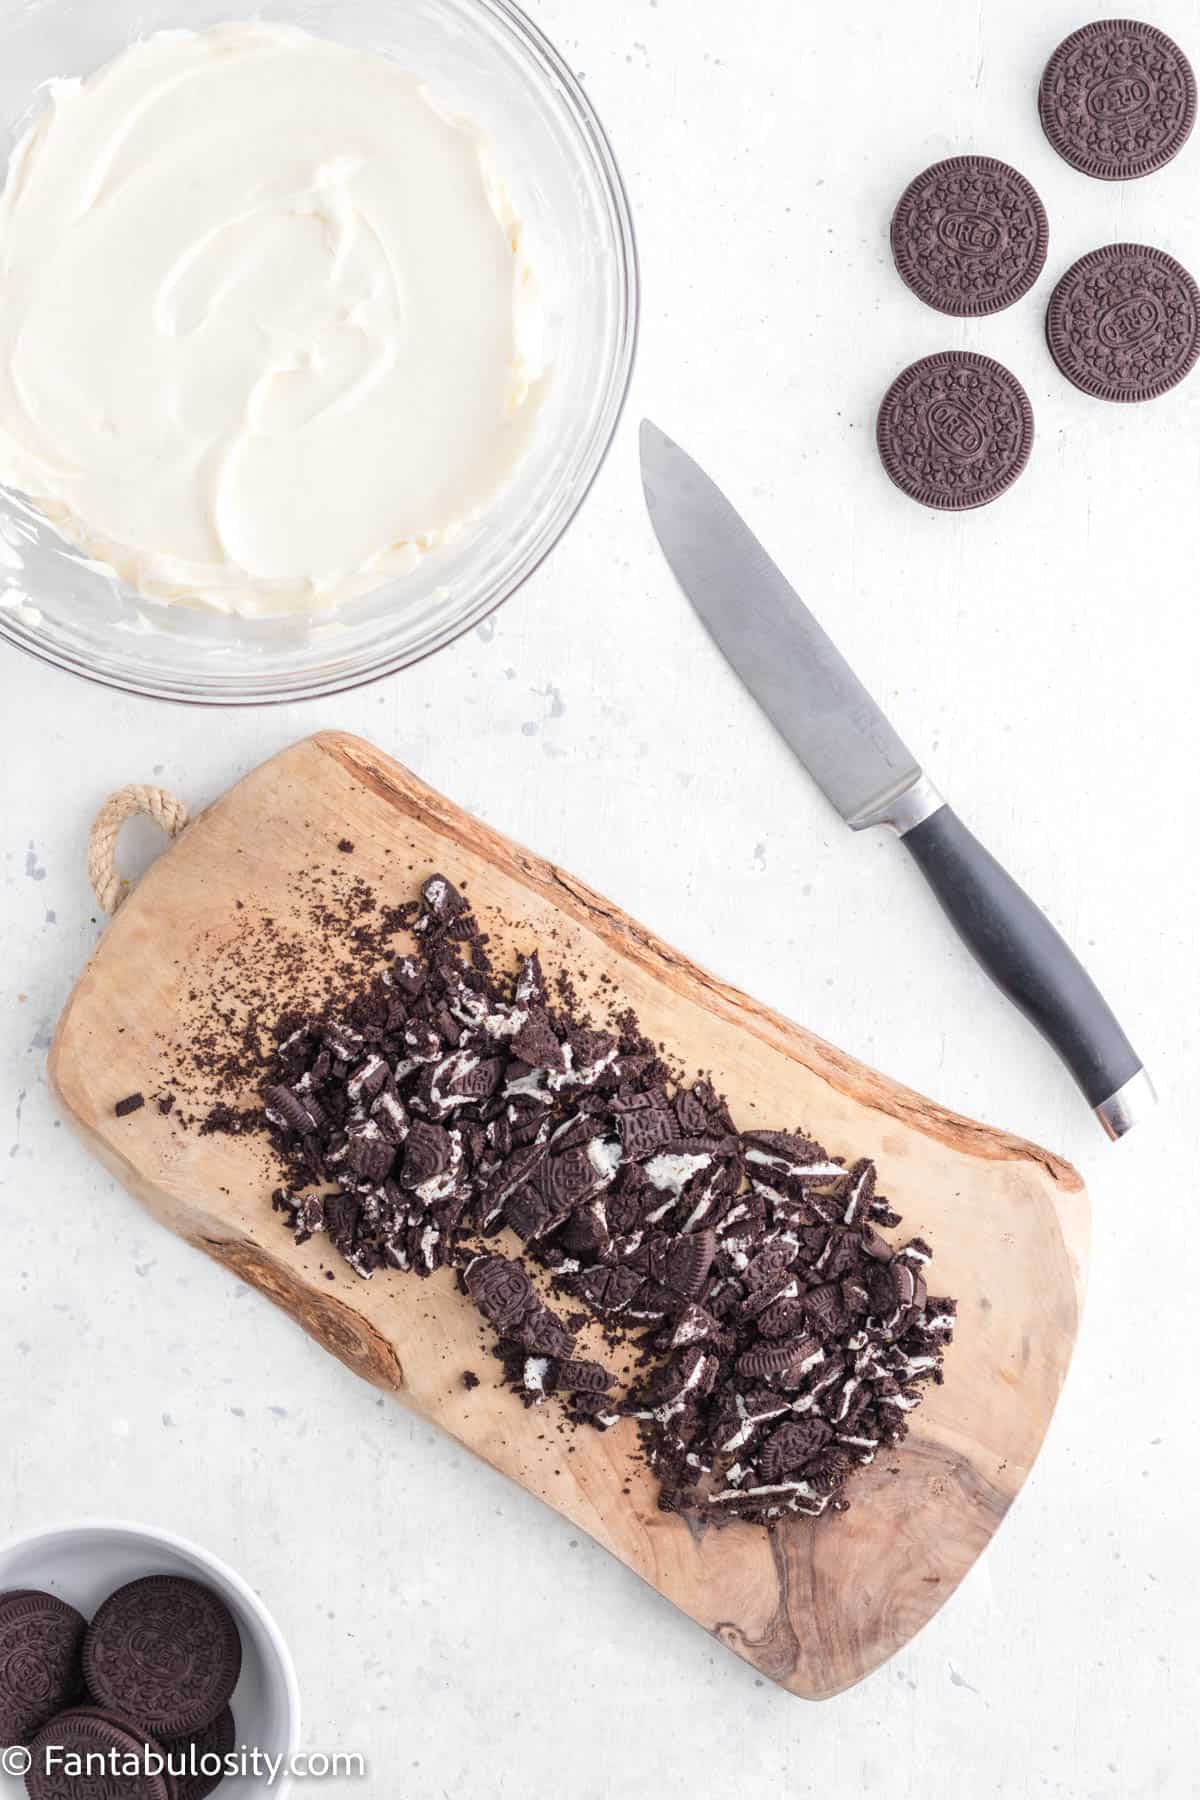 Oreo cookies have been chopped into small pieces on a wooden board